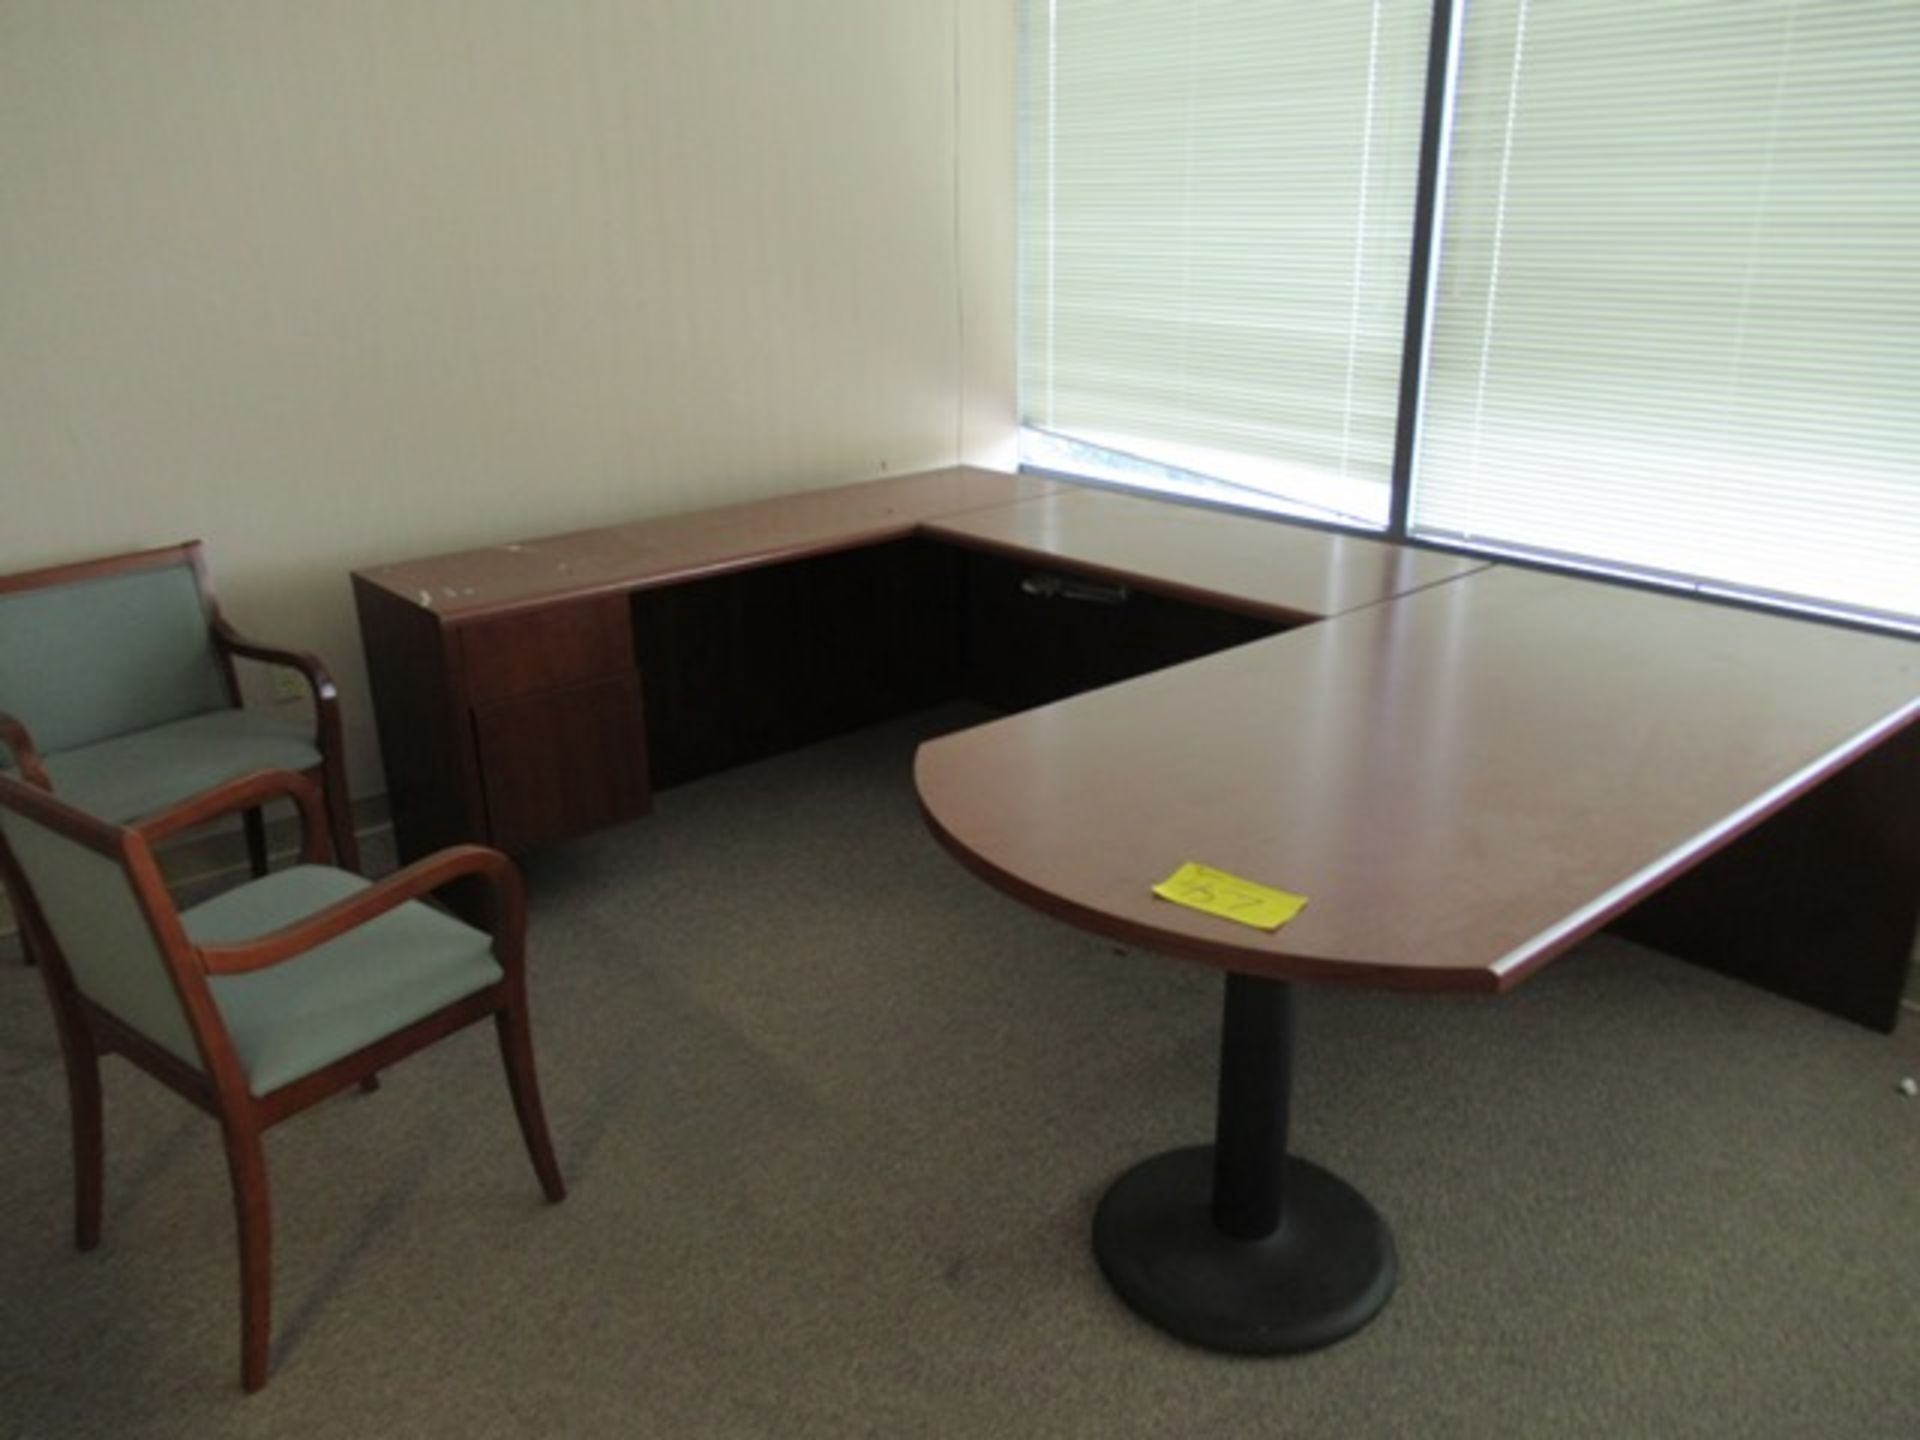 LOT CONTENTS OF 2 OFFICES - DESKS, CHAIR, ETC. (MO2NDF)